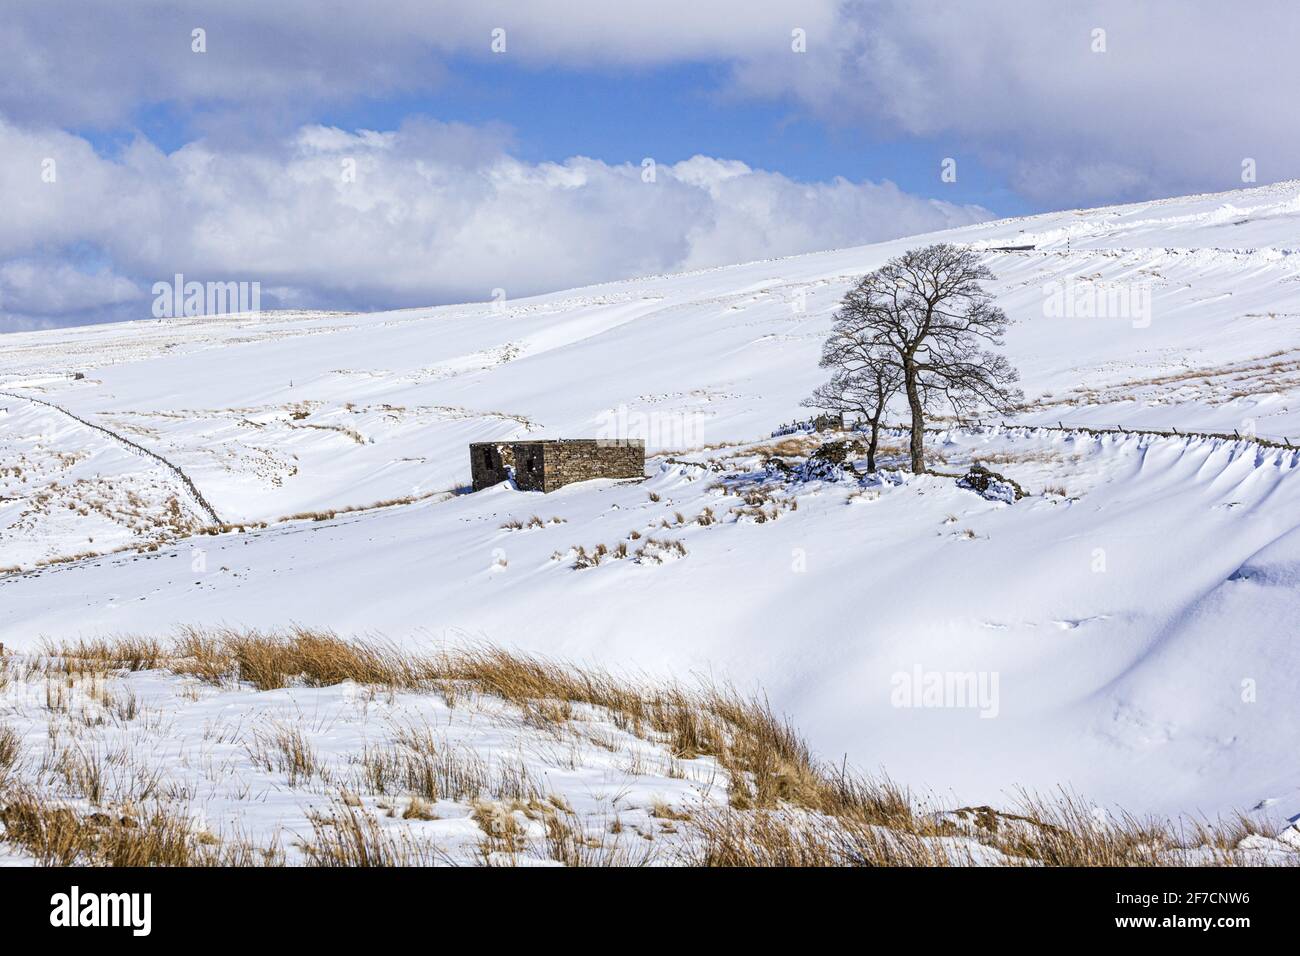 Winter in the Pennines - A snowy landscape near Coalcleugh, Northumberland UK Stock Photo